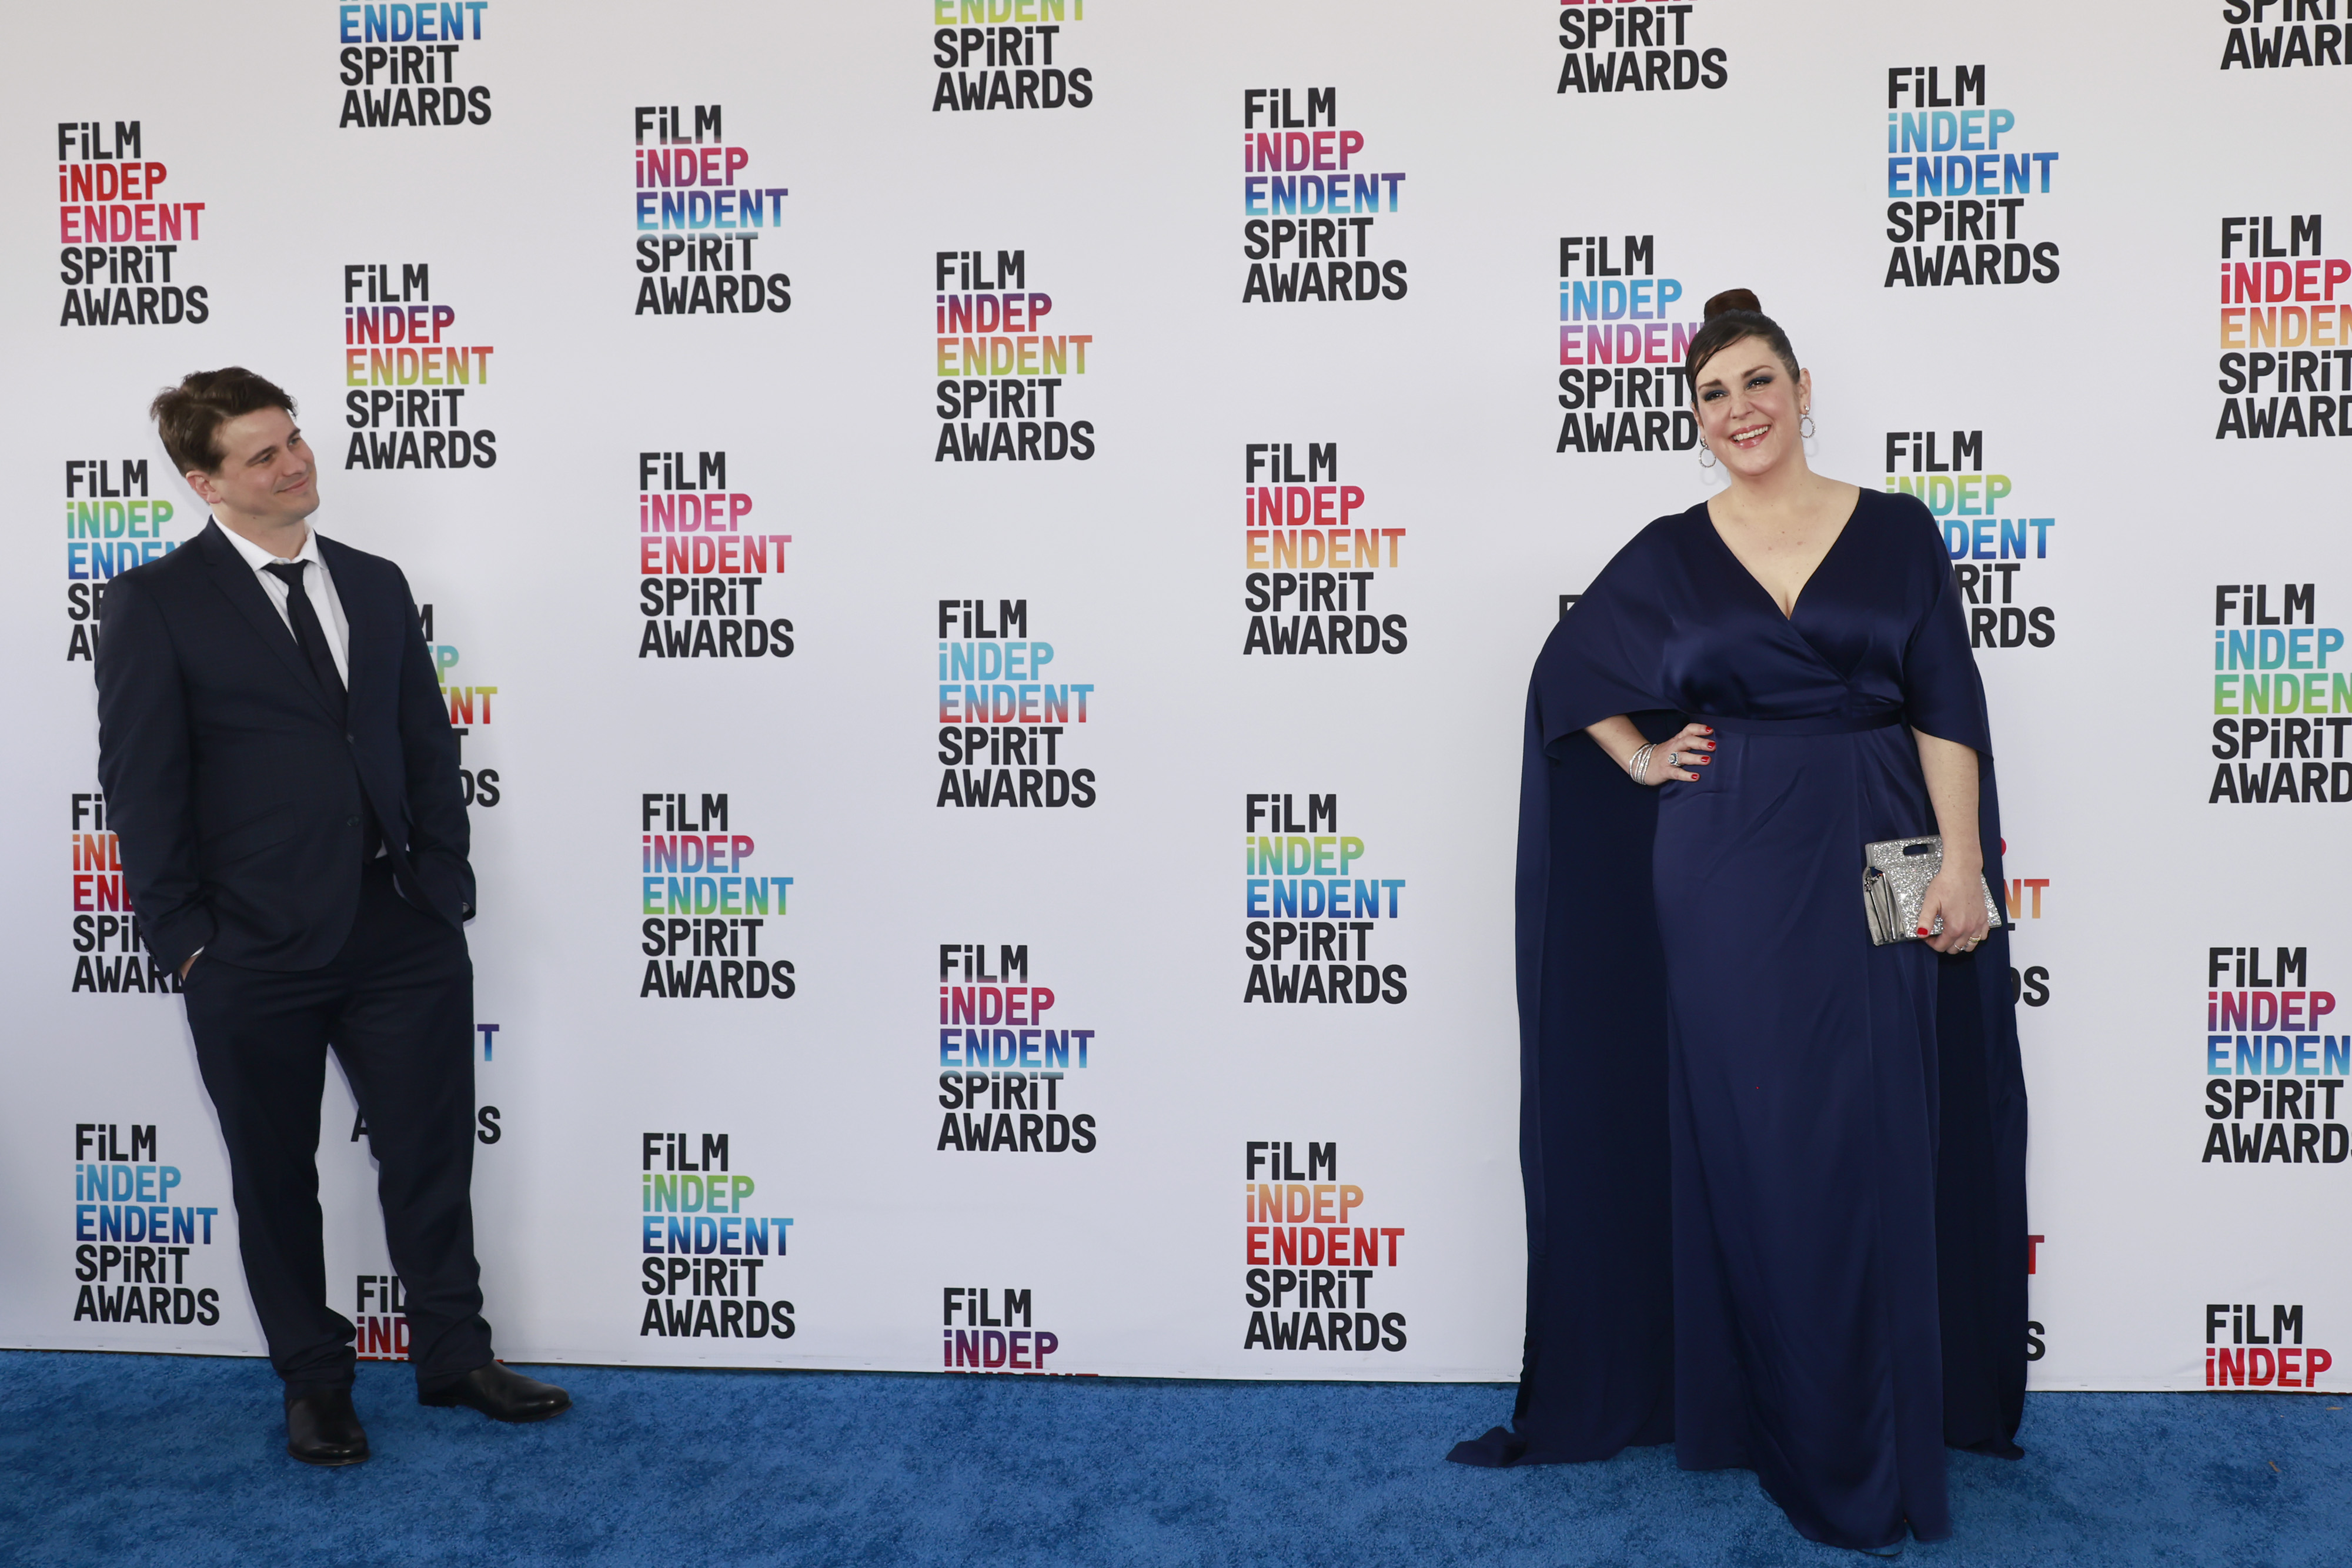 Jason Ritter and Melanie Lynskey attend the 2023 Film Independent Spirit Awards on March 04, 2023 in Santa Monica, California | Source: Getty Images